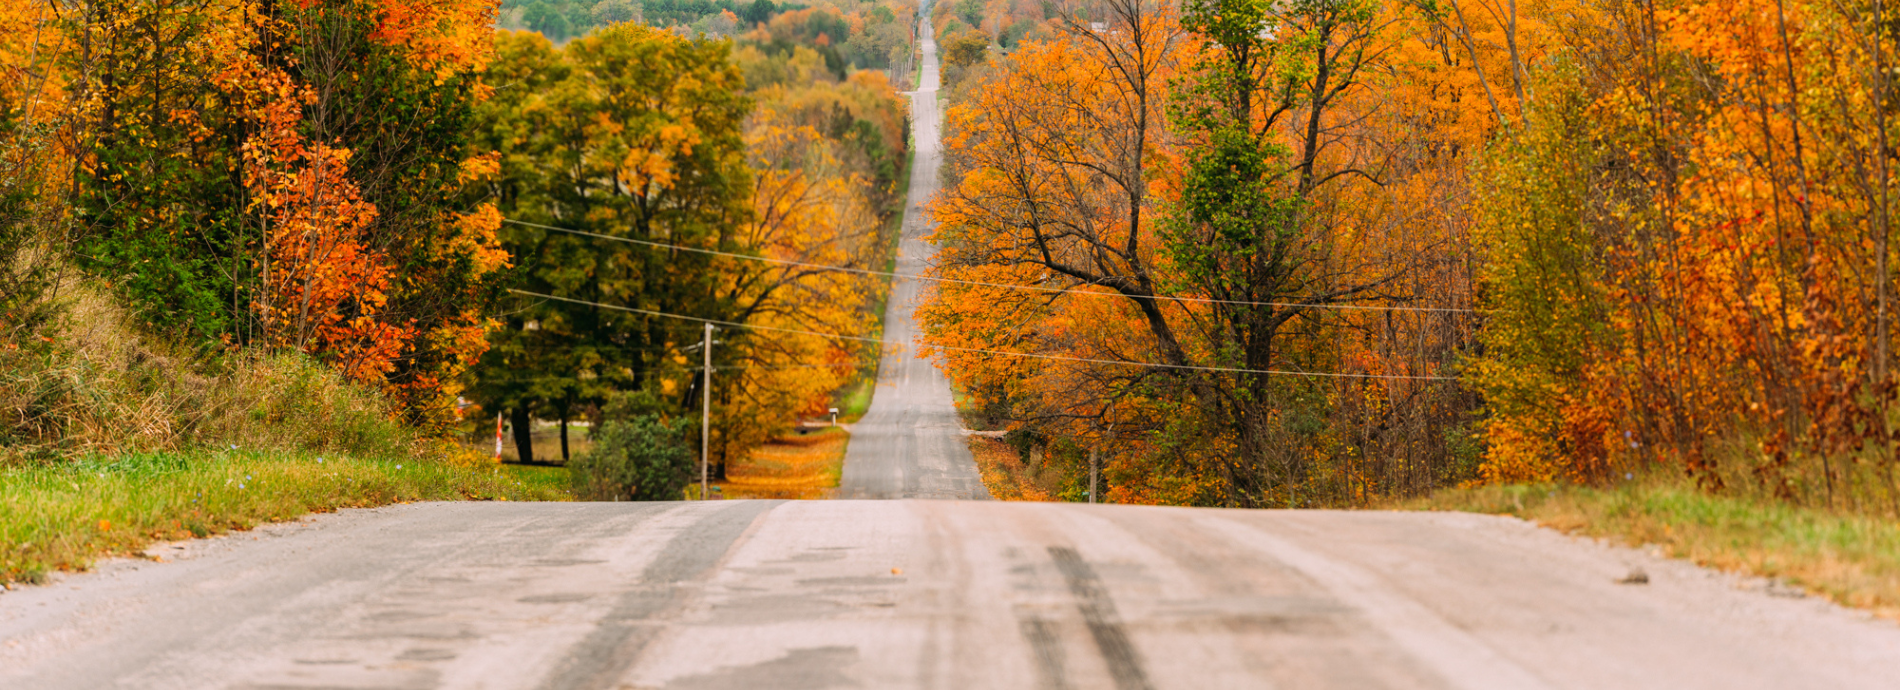 Road in Severn during fall